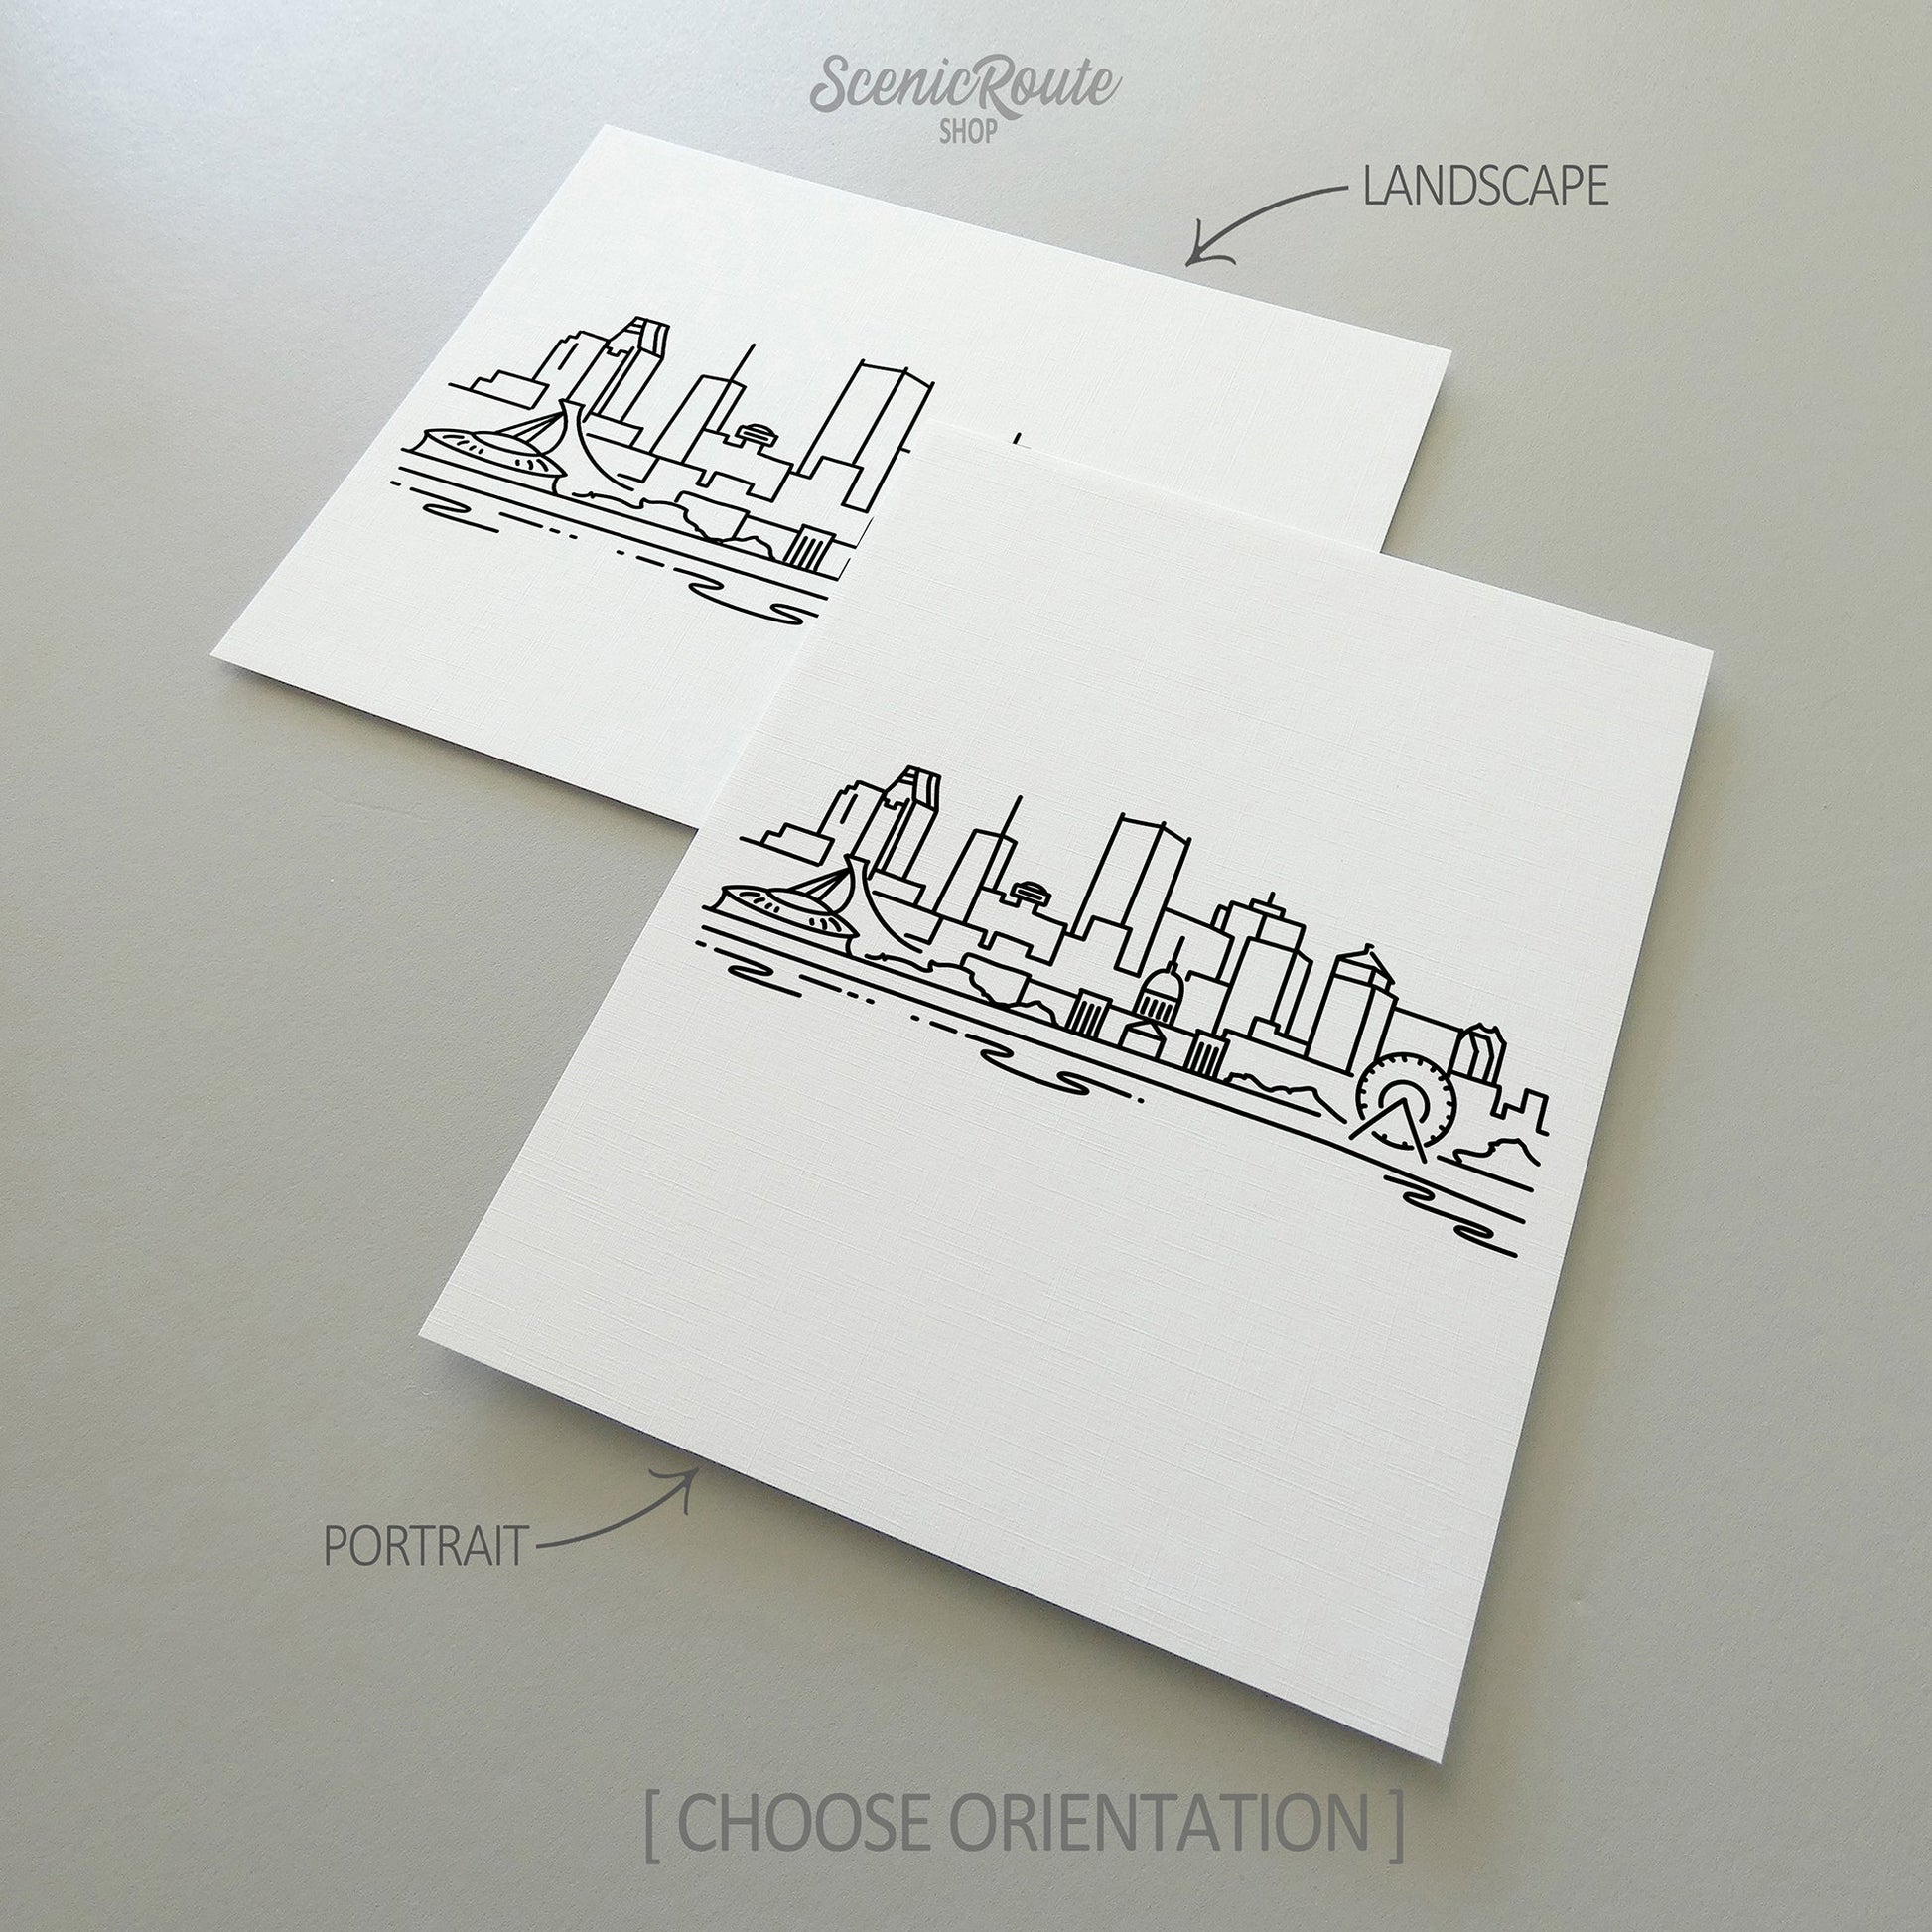 Two line art drawings of the Montreal Skyline on white linen paper with a gray background.  The pieces are shown in portrait and landscape orientation for the available art print options.